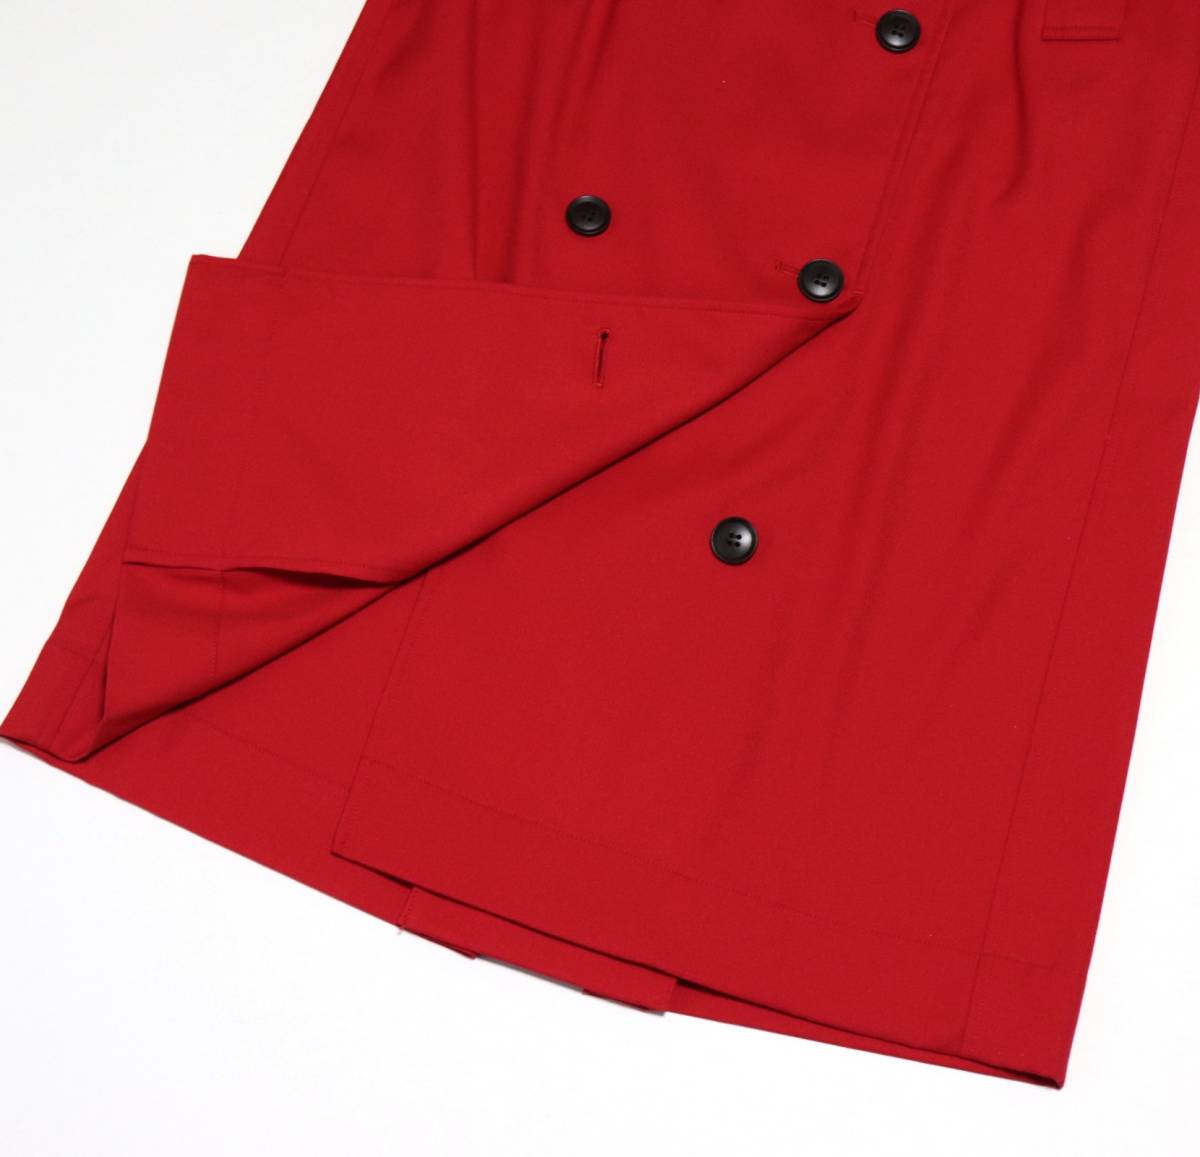  collaboration! tag equipped [iCB I si- Be ×VERY]VERY publication to wrench skirt red 4(L) v2223-1611